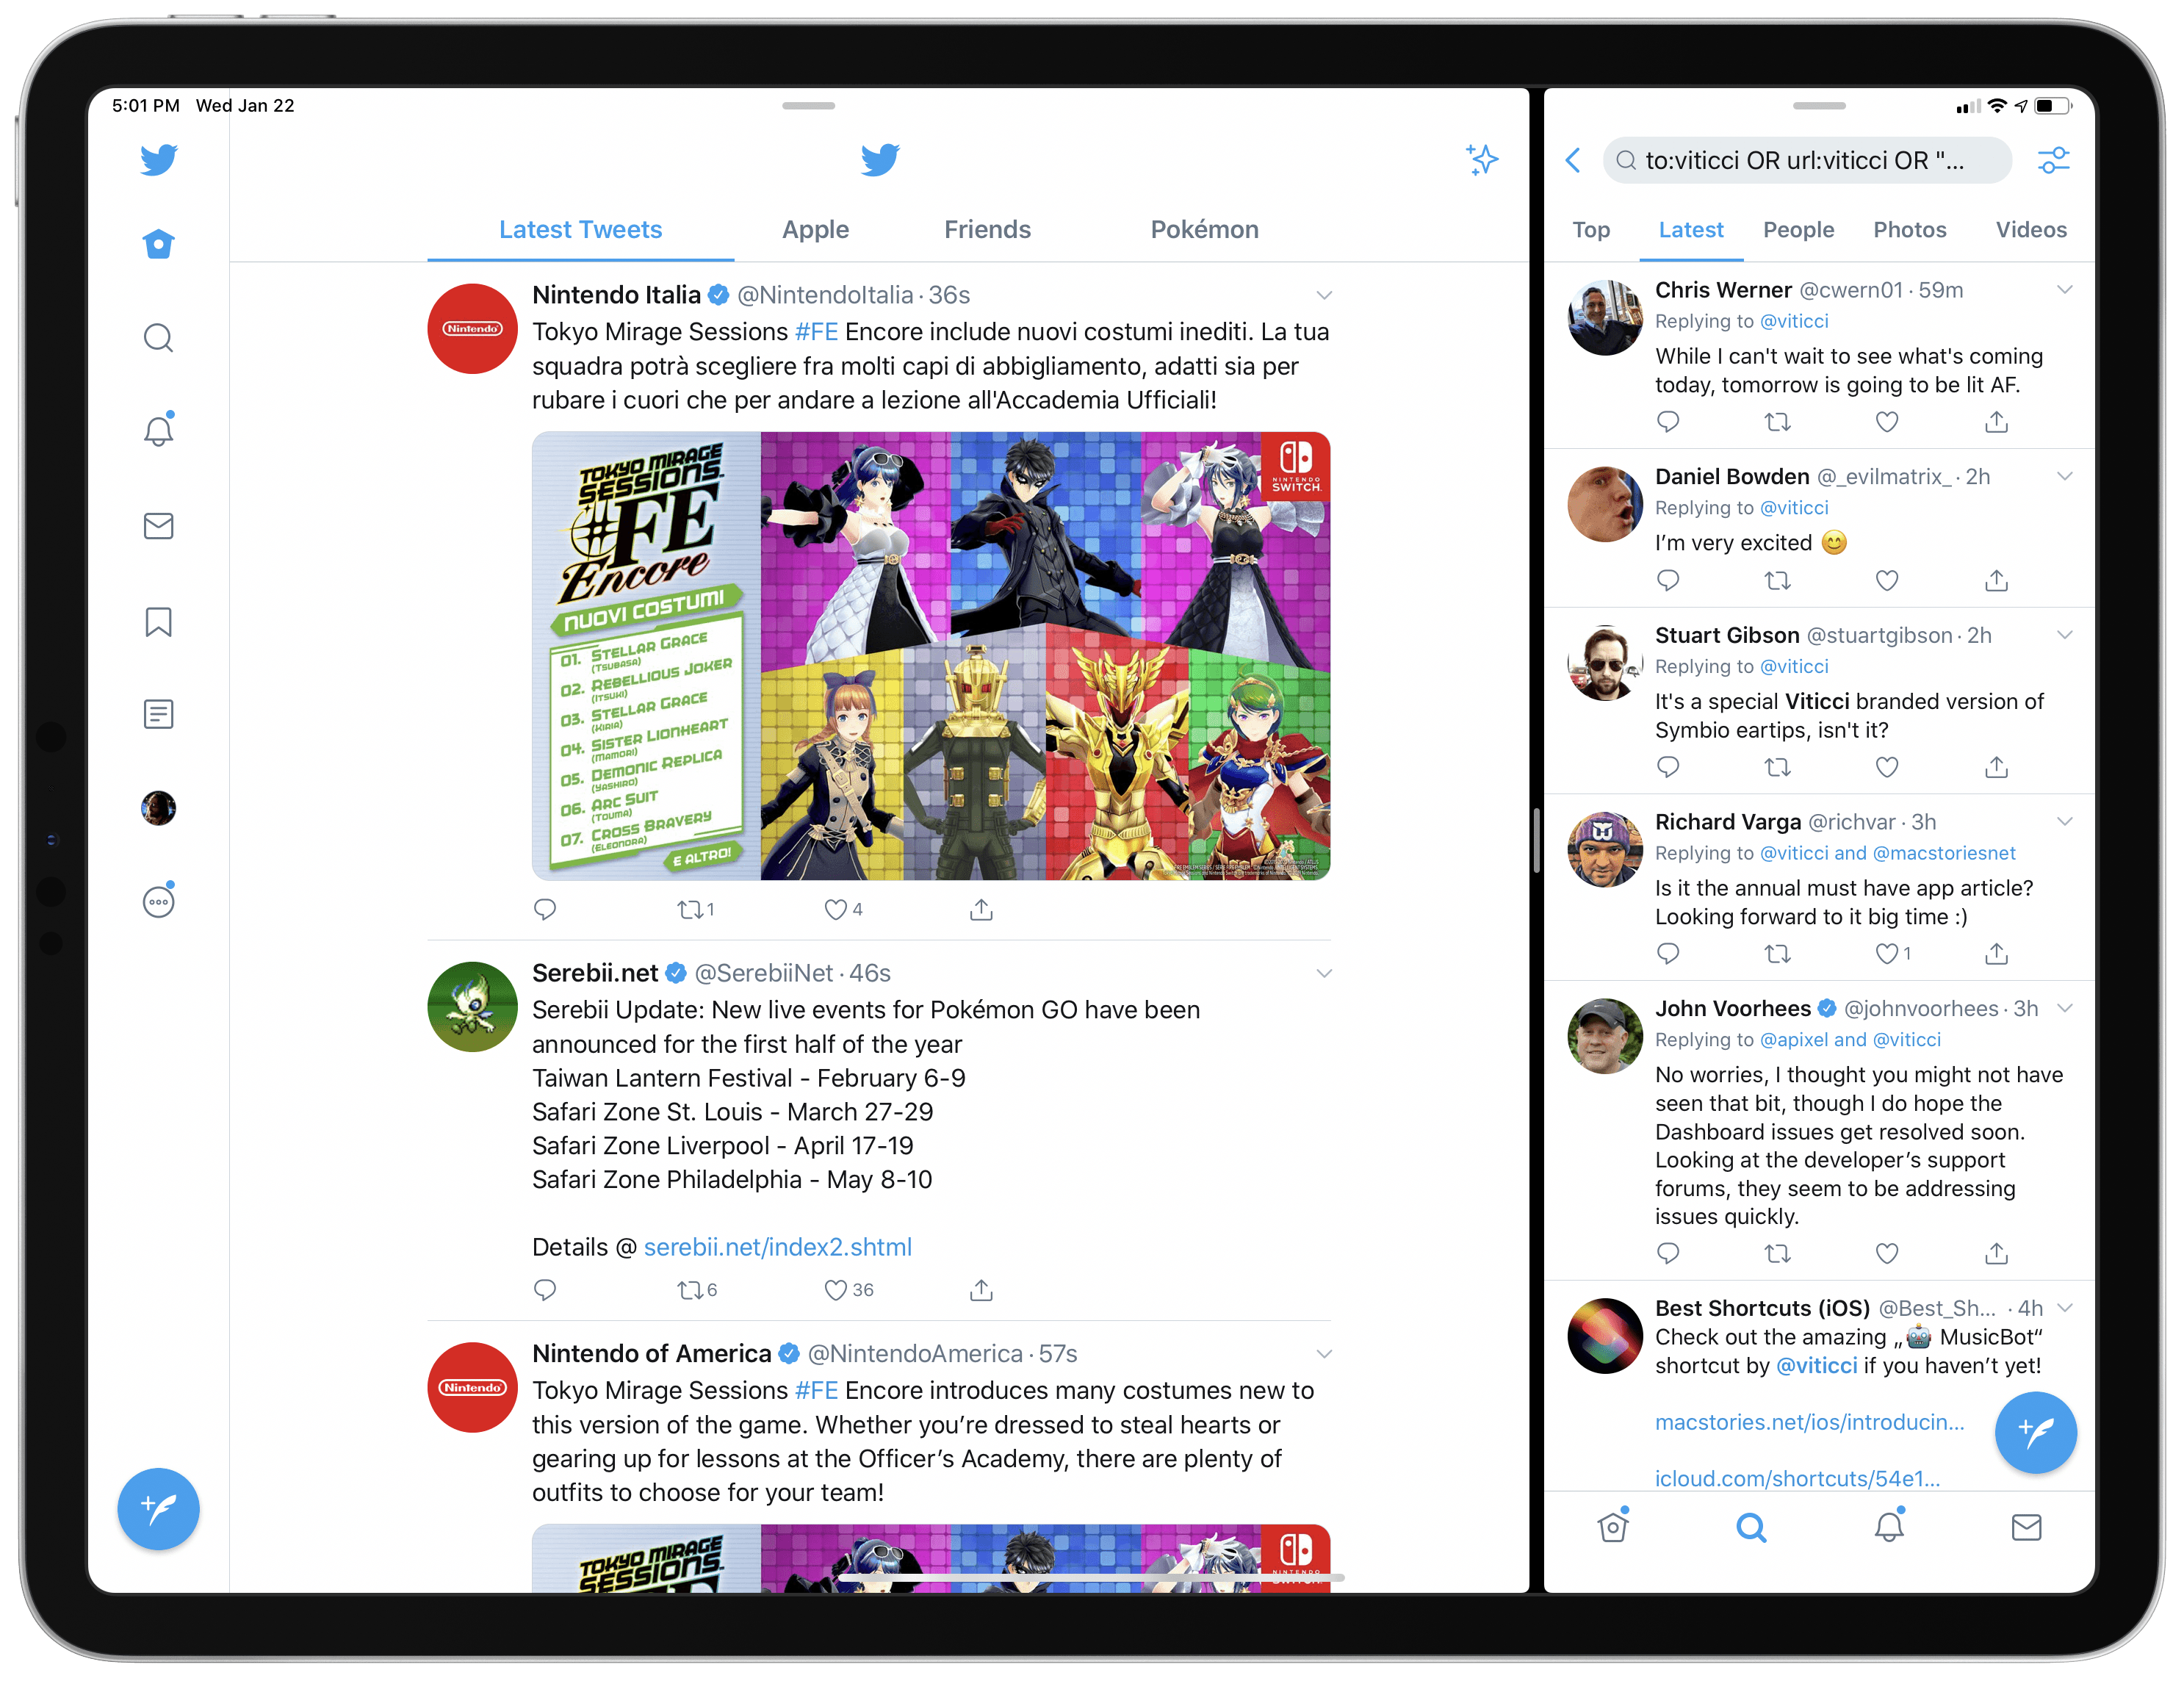 To compensate for Twitter's lack of a proper sidebar, I use the prototype twttr app in Split View, next to the main Twitter for iPad app.